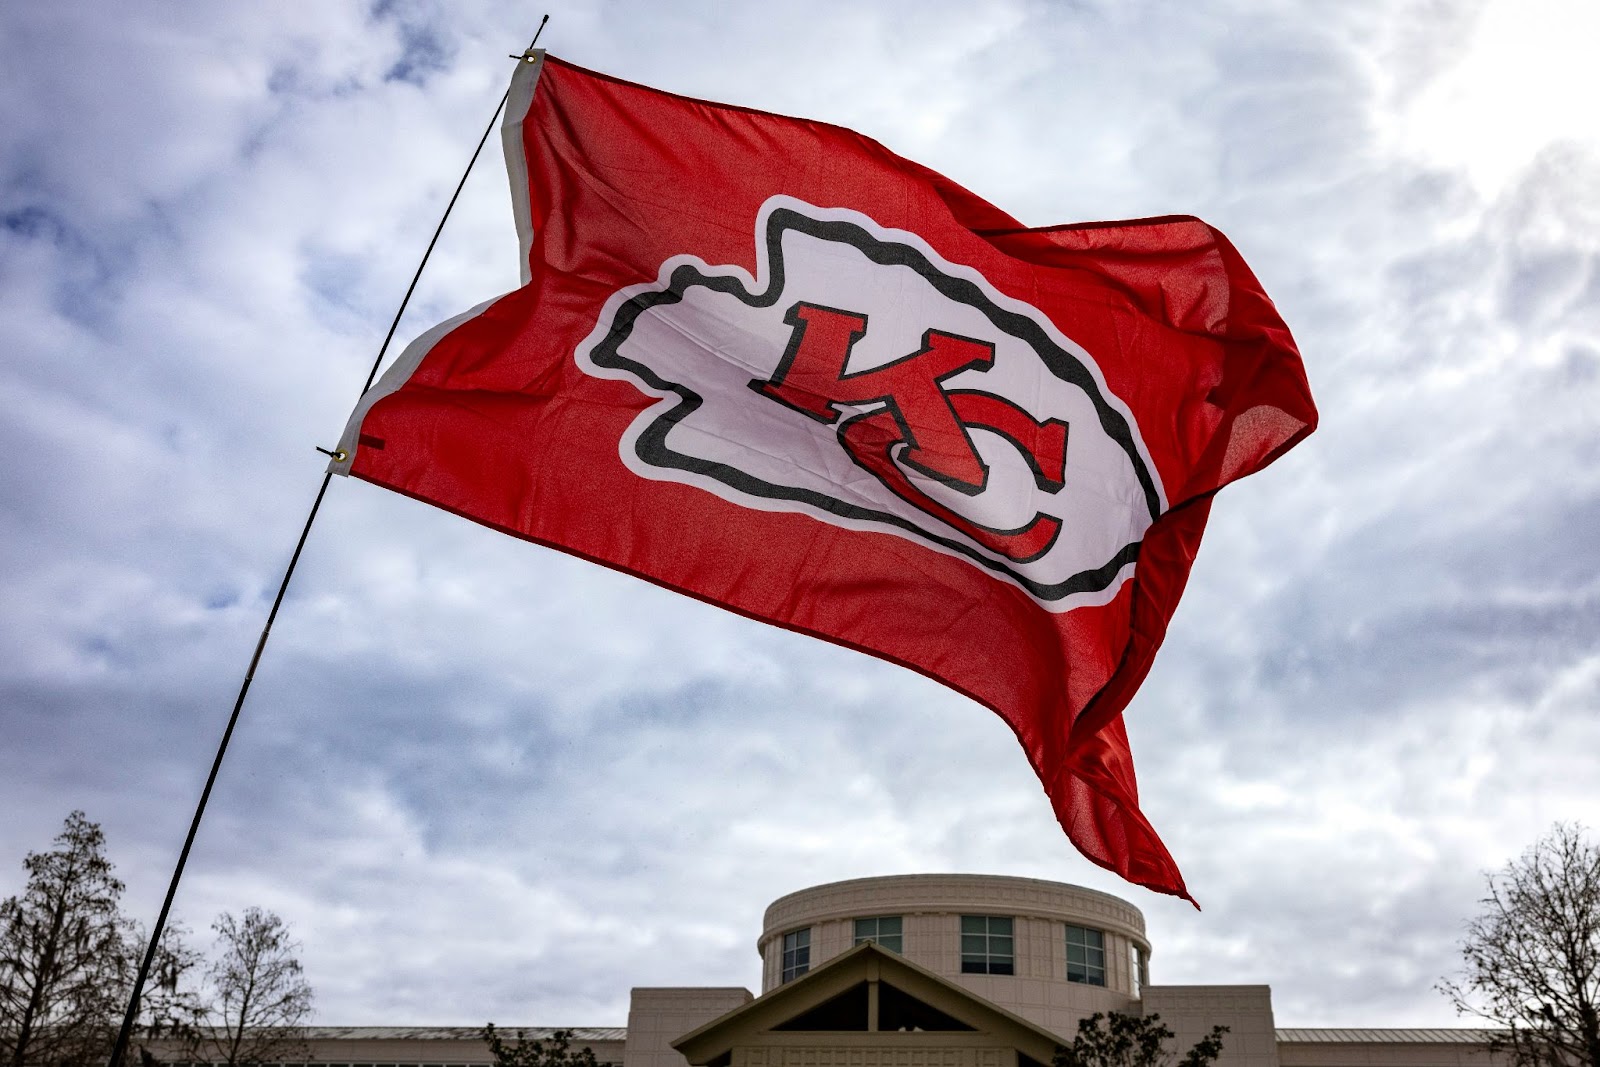 Kansas Chiefs flag flying in front of a building